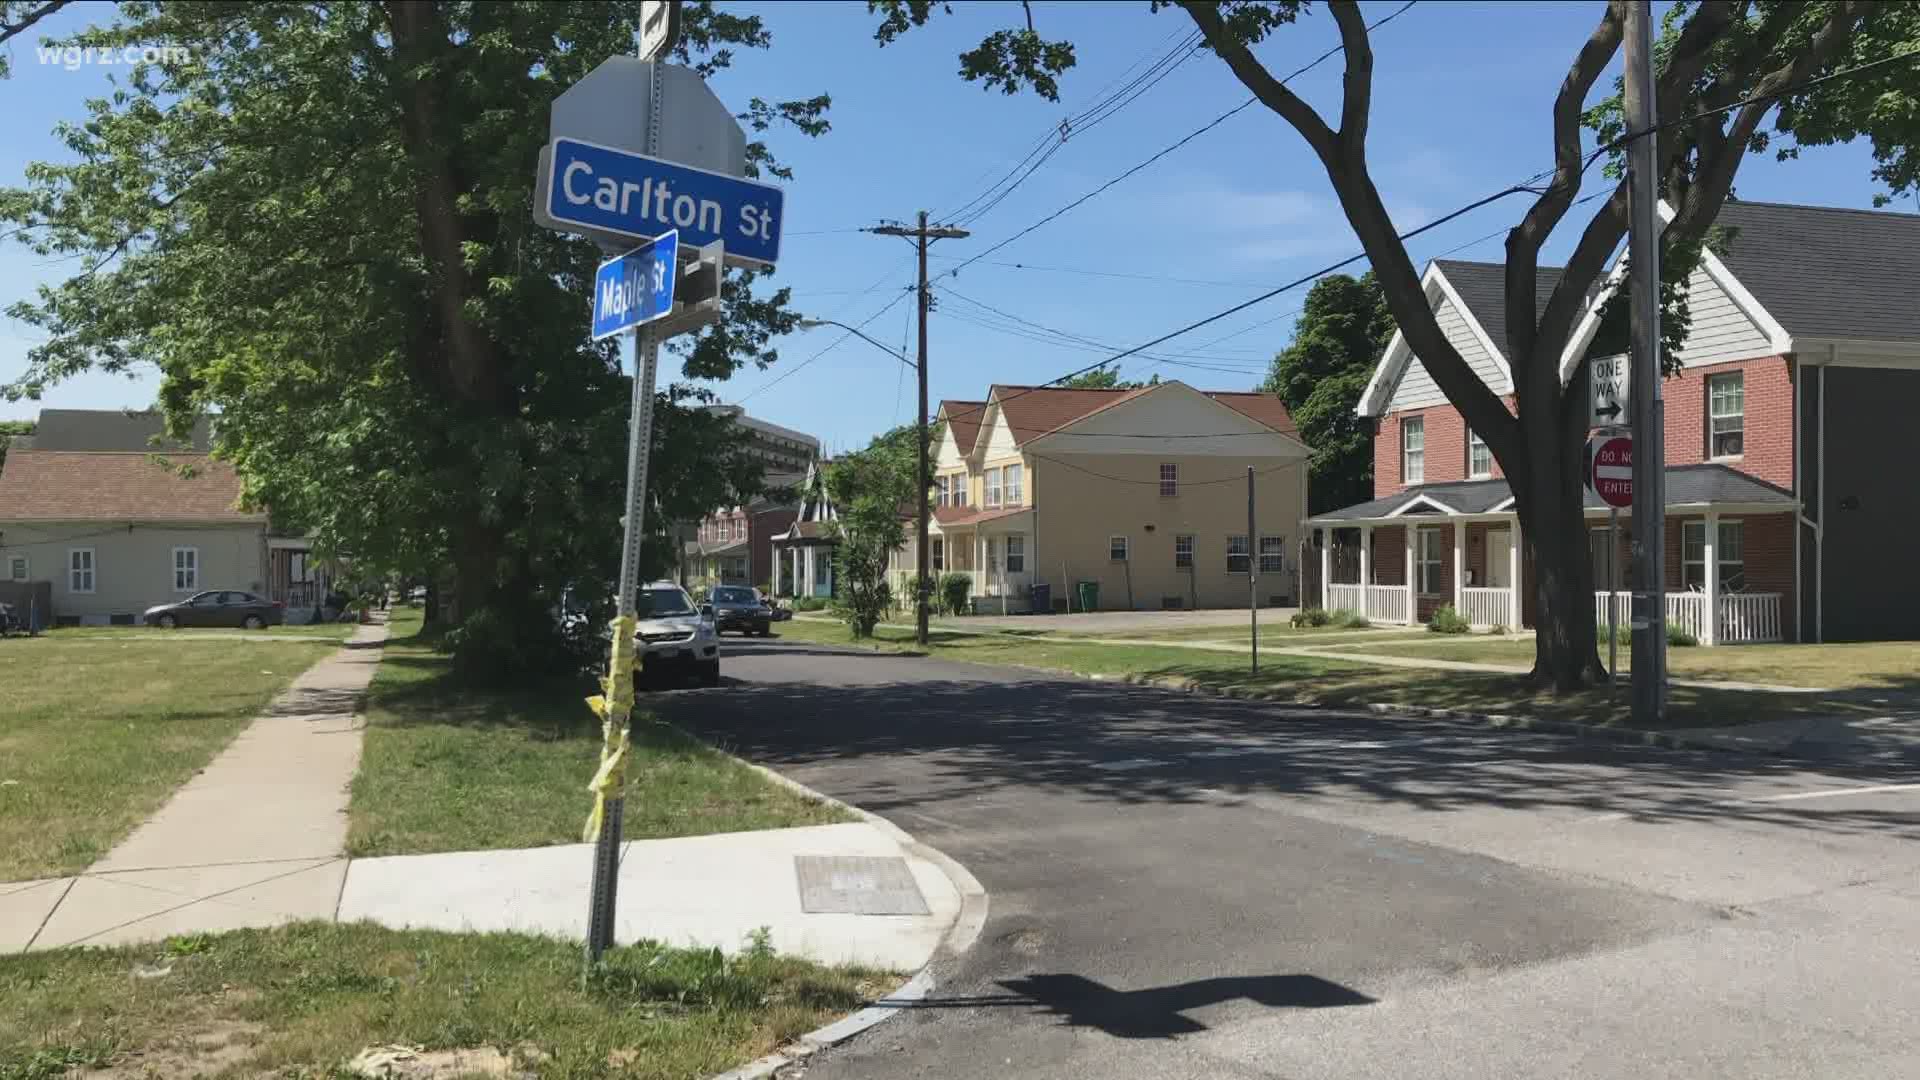 Buffalo police say two men were shot early Sunday morning in an apparent drive-by in the city's Fruit Belt neighborhood around 1:30 this morning.